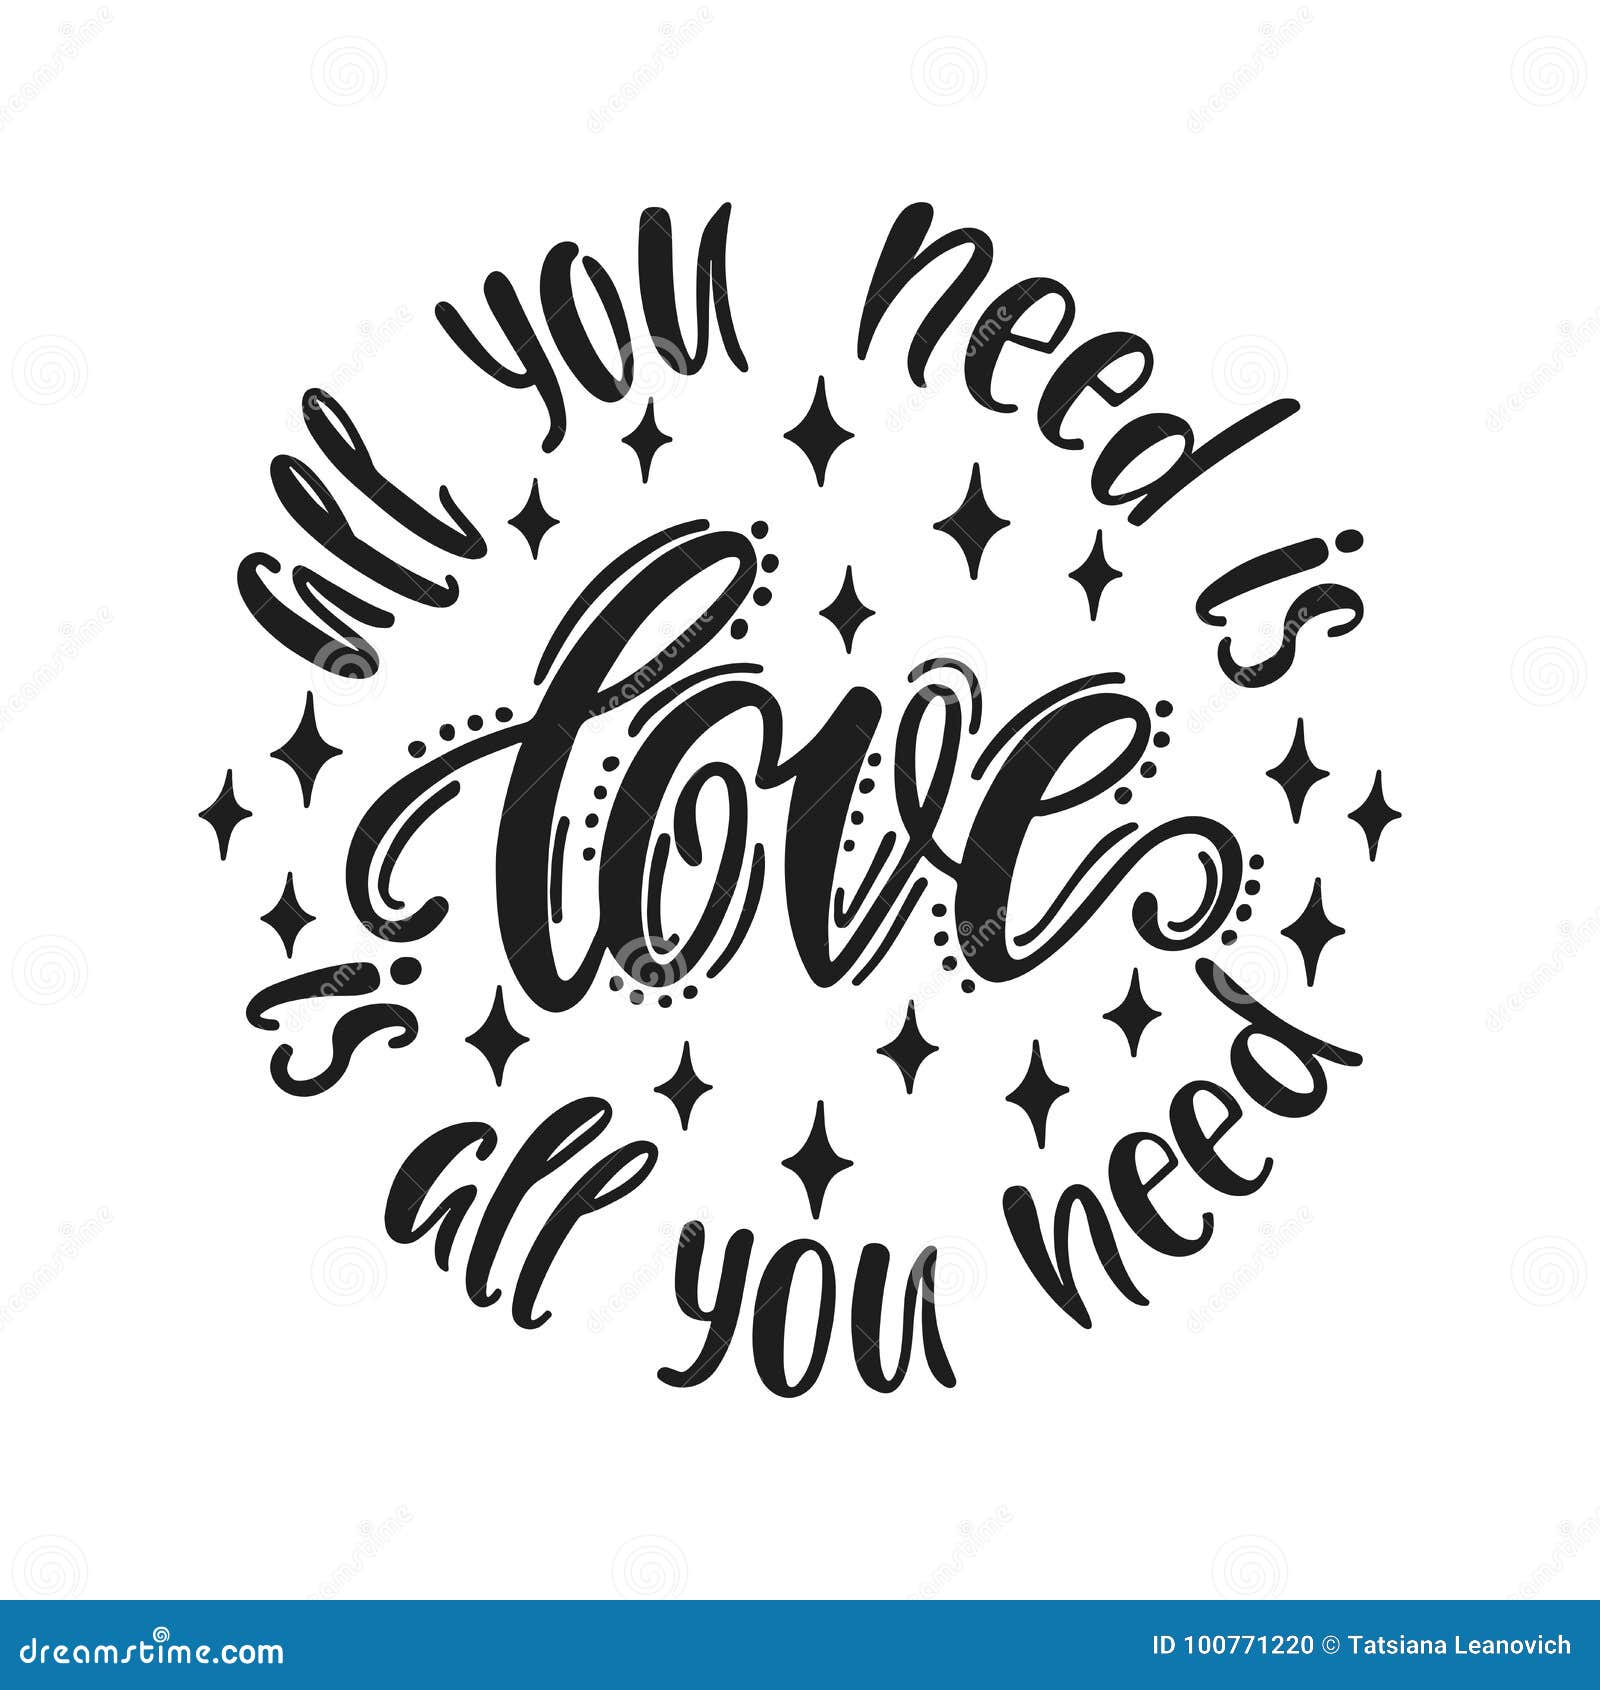 Love is all you need hand written lettering Vector Image